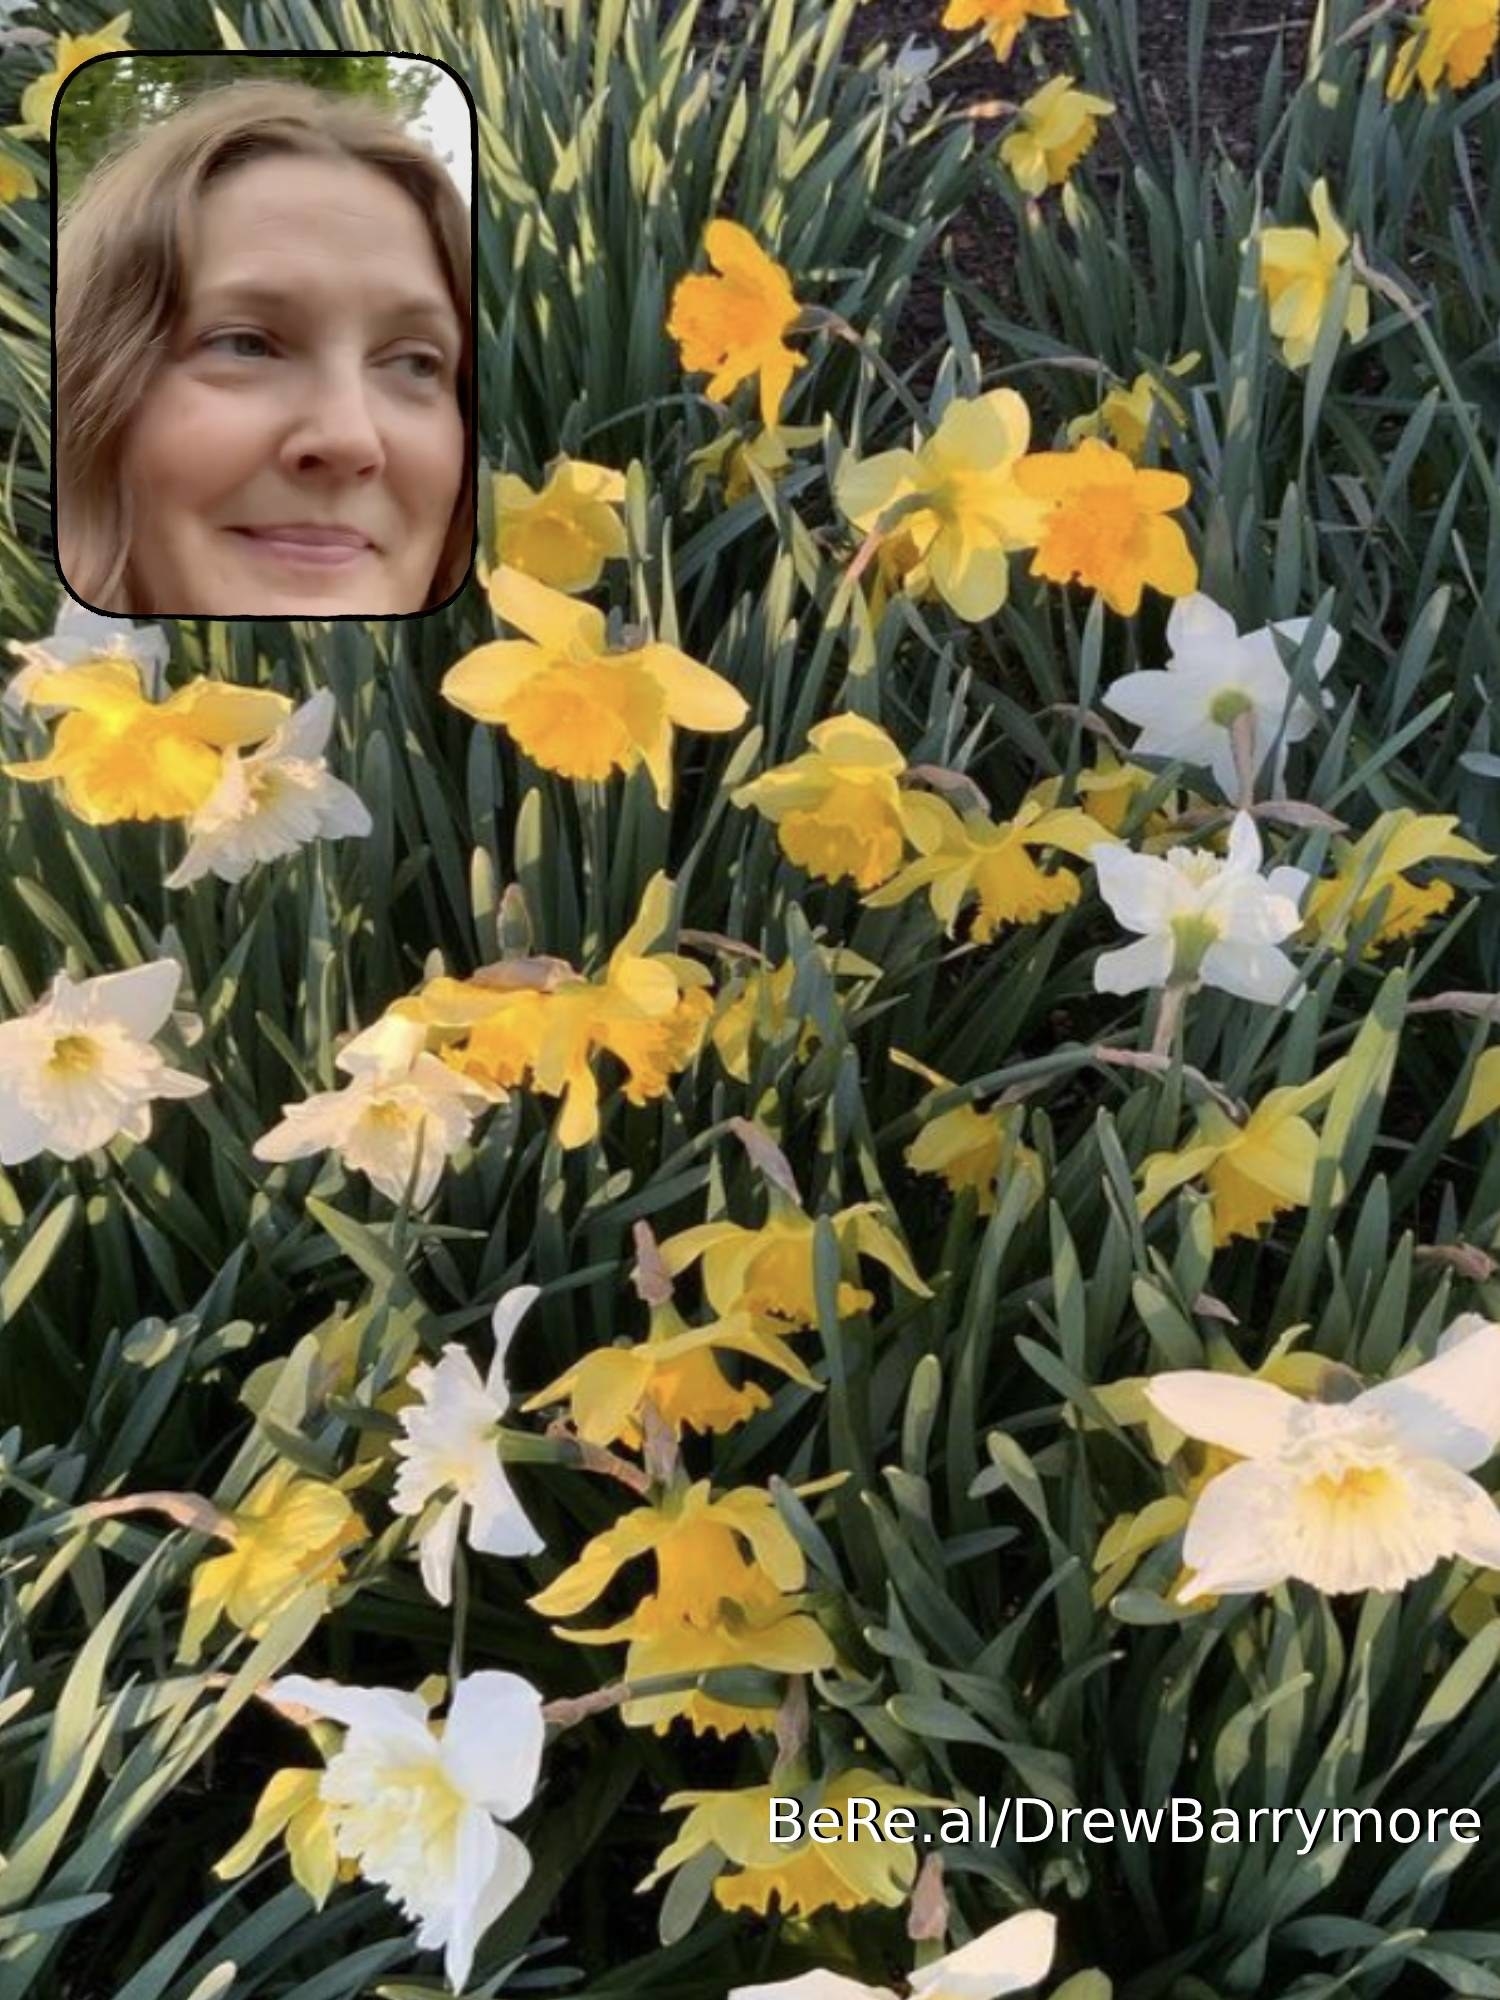 Drew Barrymore smiling at a field of flowers